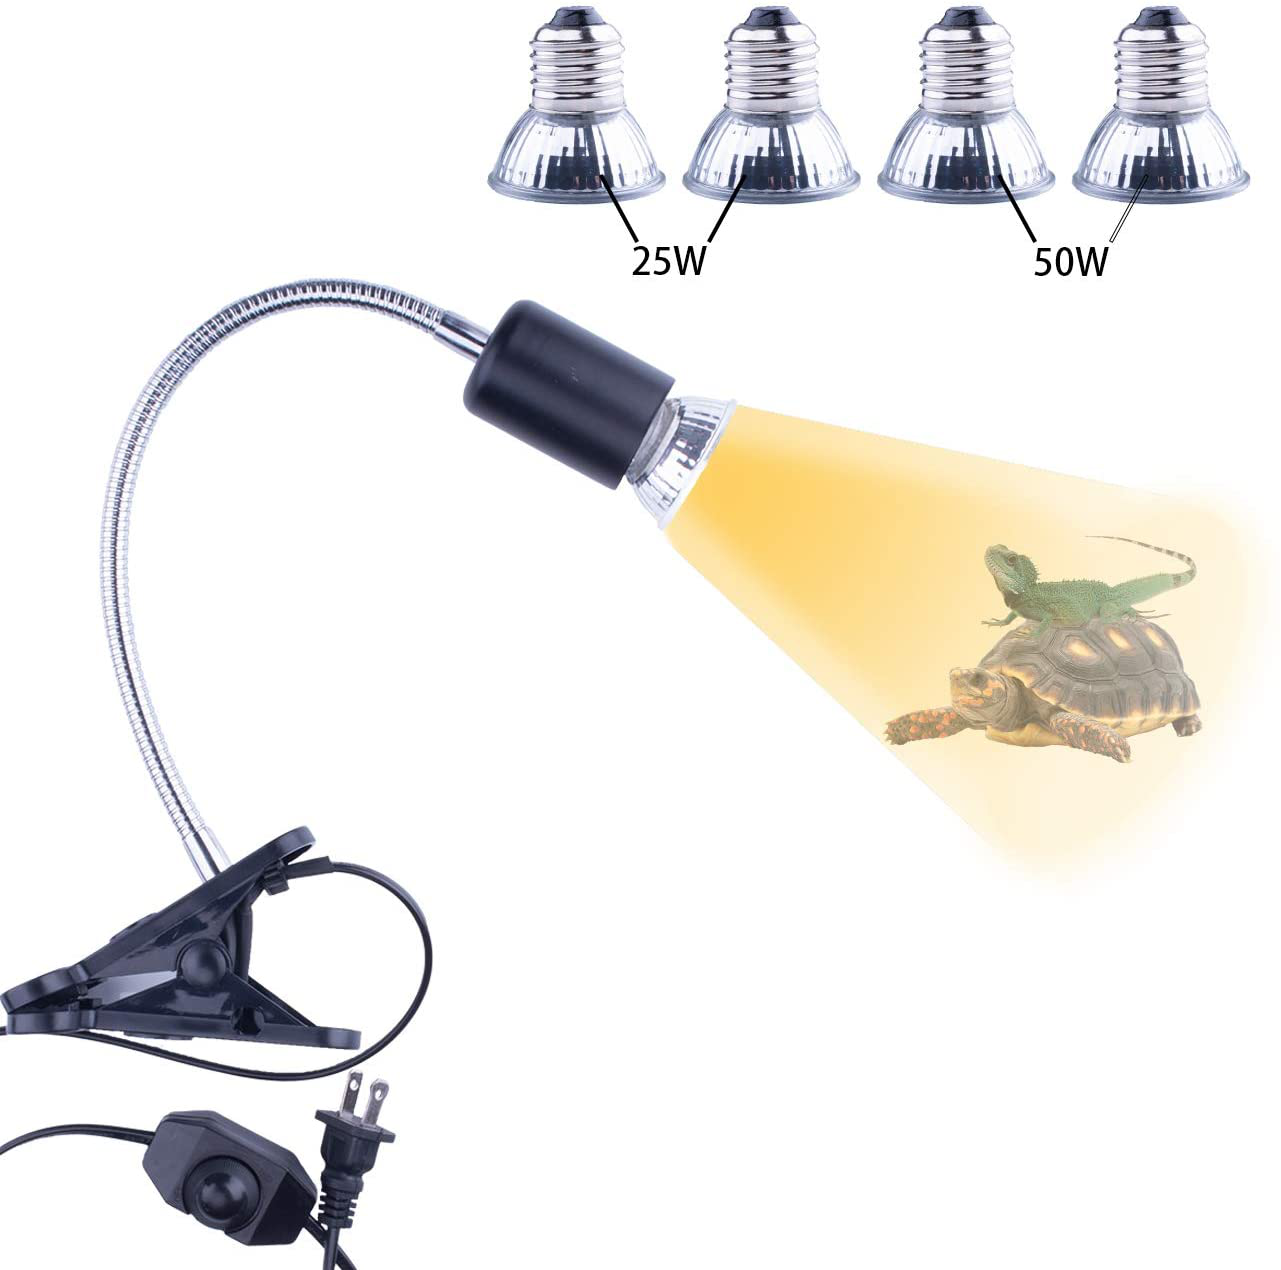 Reptile Heat Lamp, UVB Bulb, UVB Reptile Light Fixture, UVA UVB Reptile Light, Aquatic Turtle Heating Lamp, Turtle Aquarium Tank Heating Lamps Holder & Switch with 4 Heat Bulbs--White